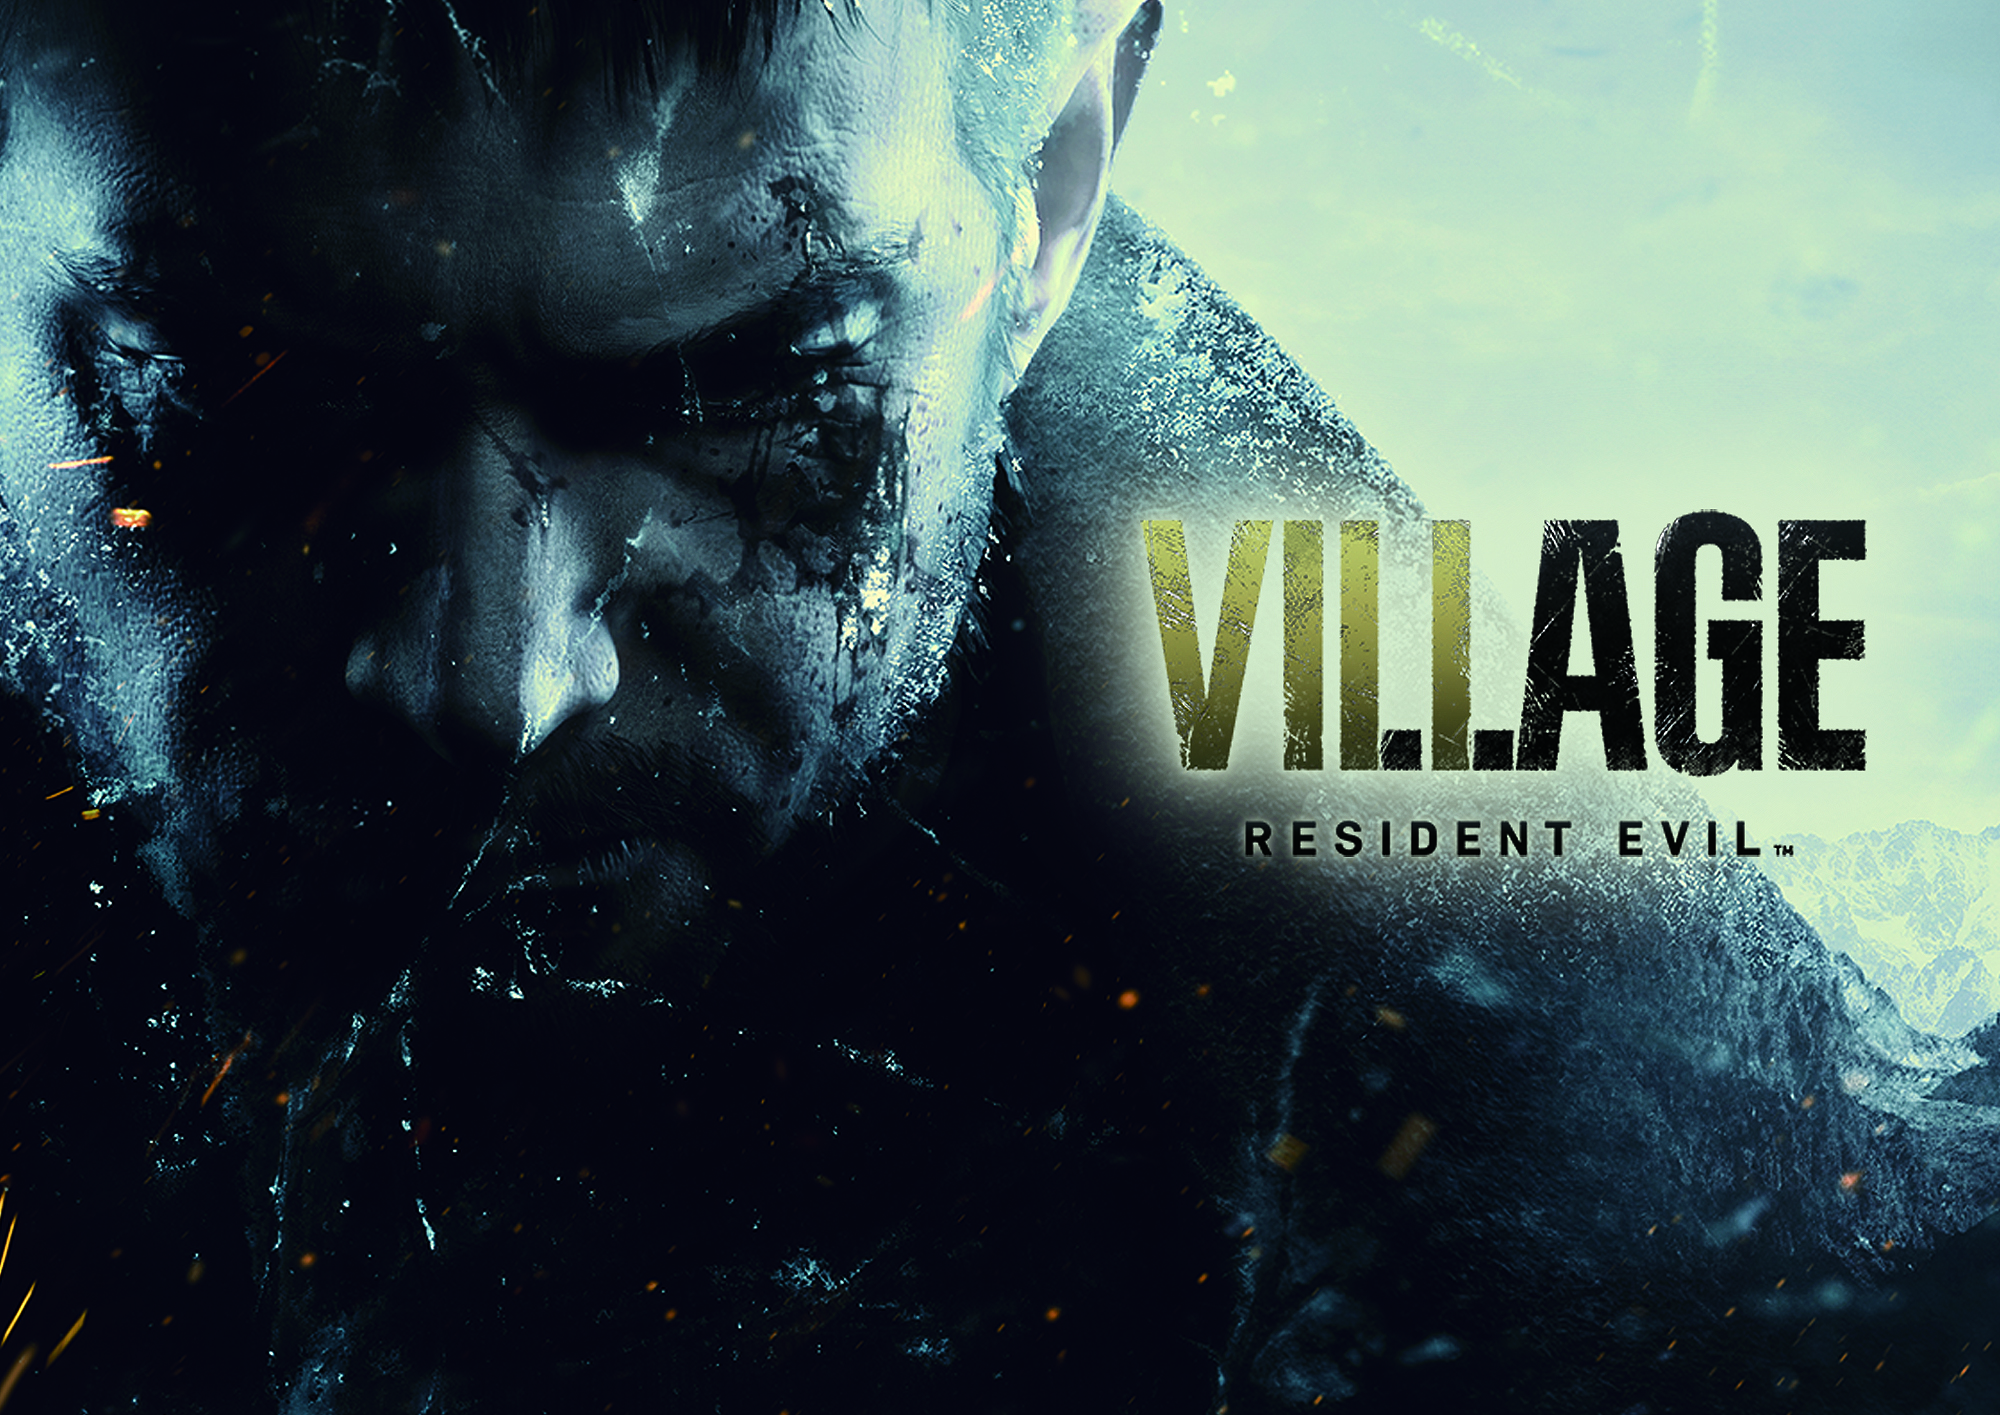 Resident evil village apk download for android - socjolo